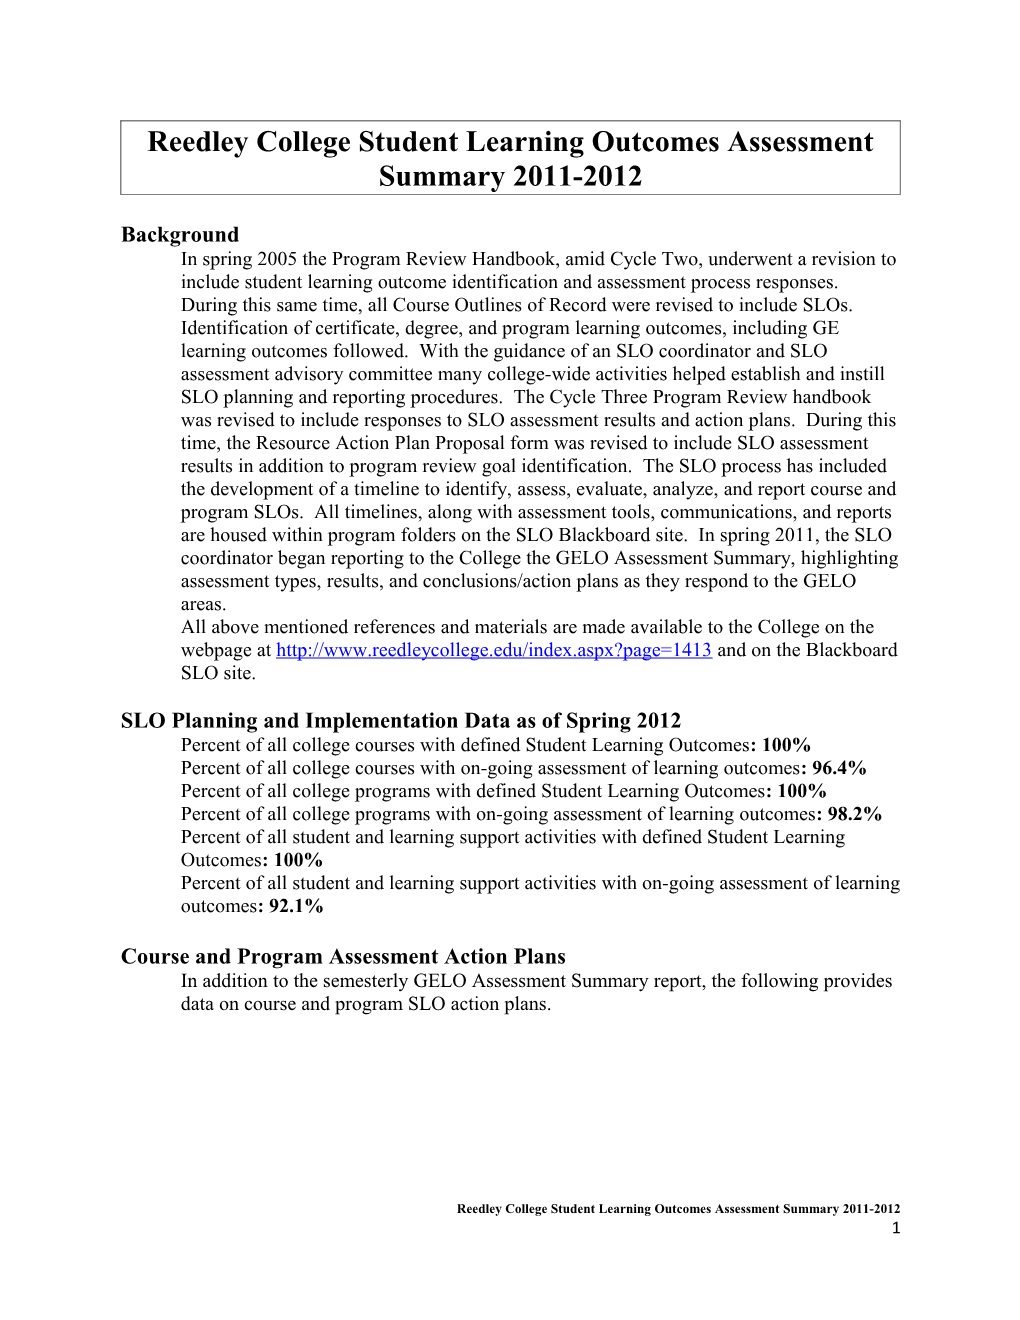 Reedley College Student Learning Outcomes Assessment Summary 2011-2012